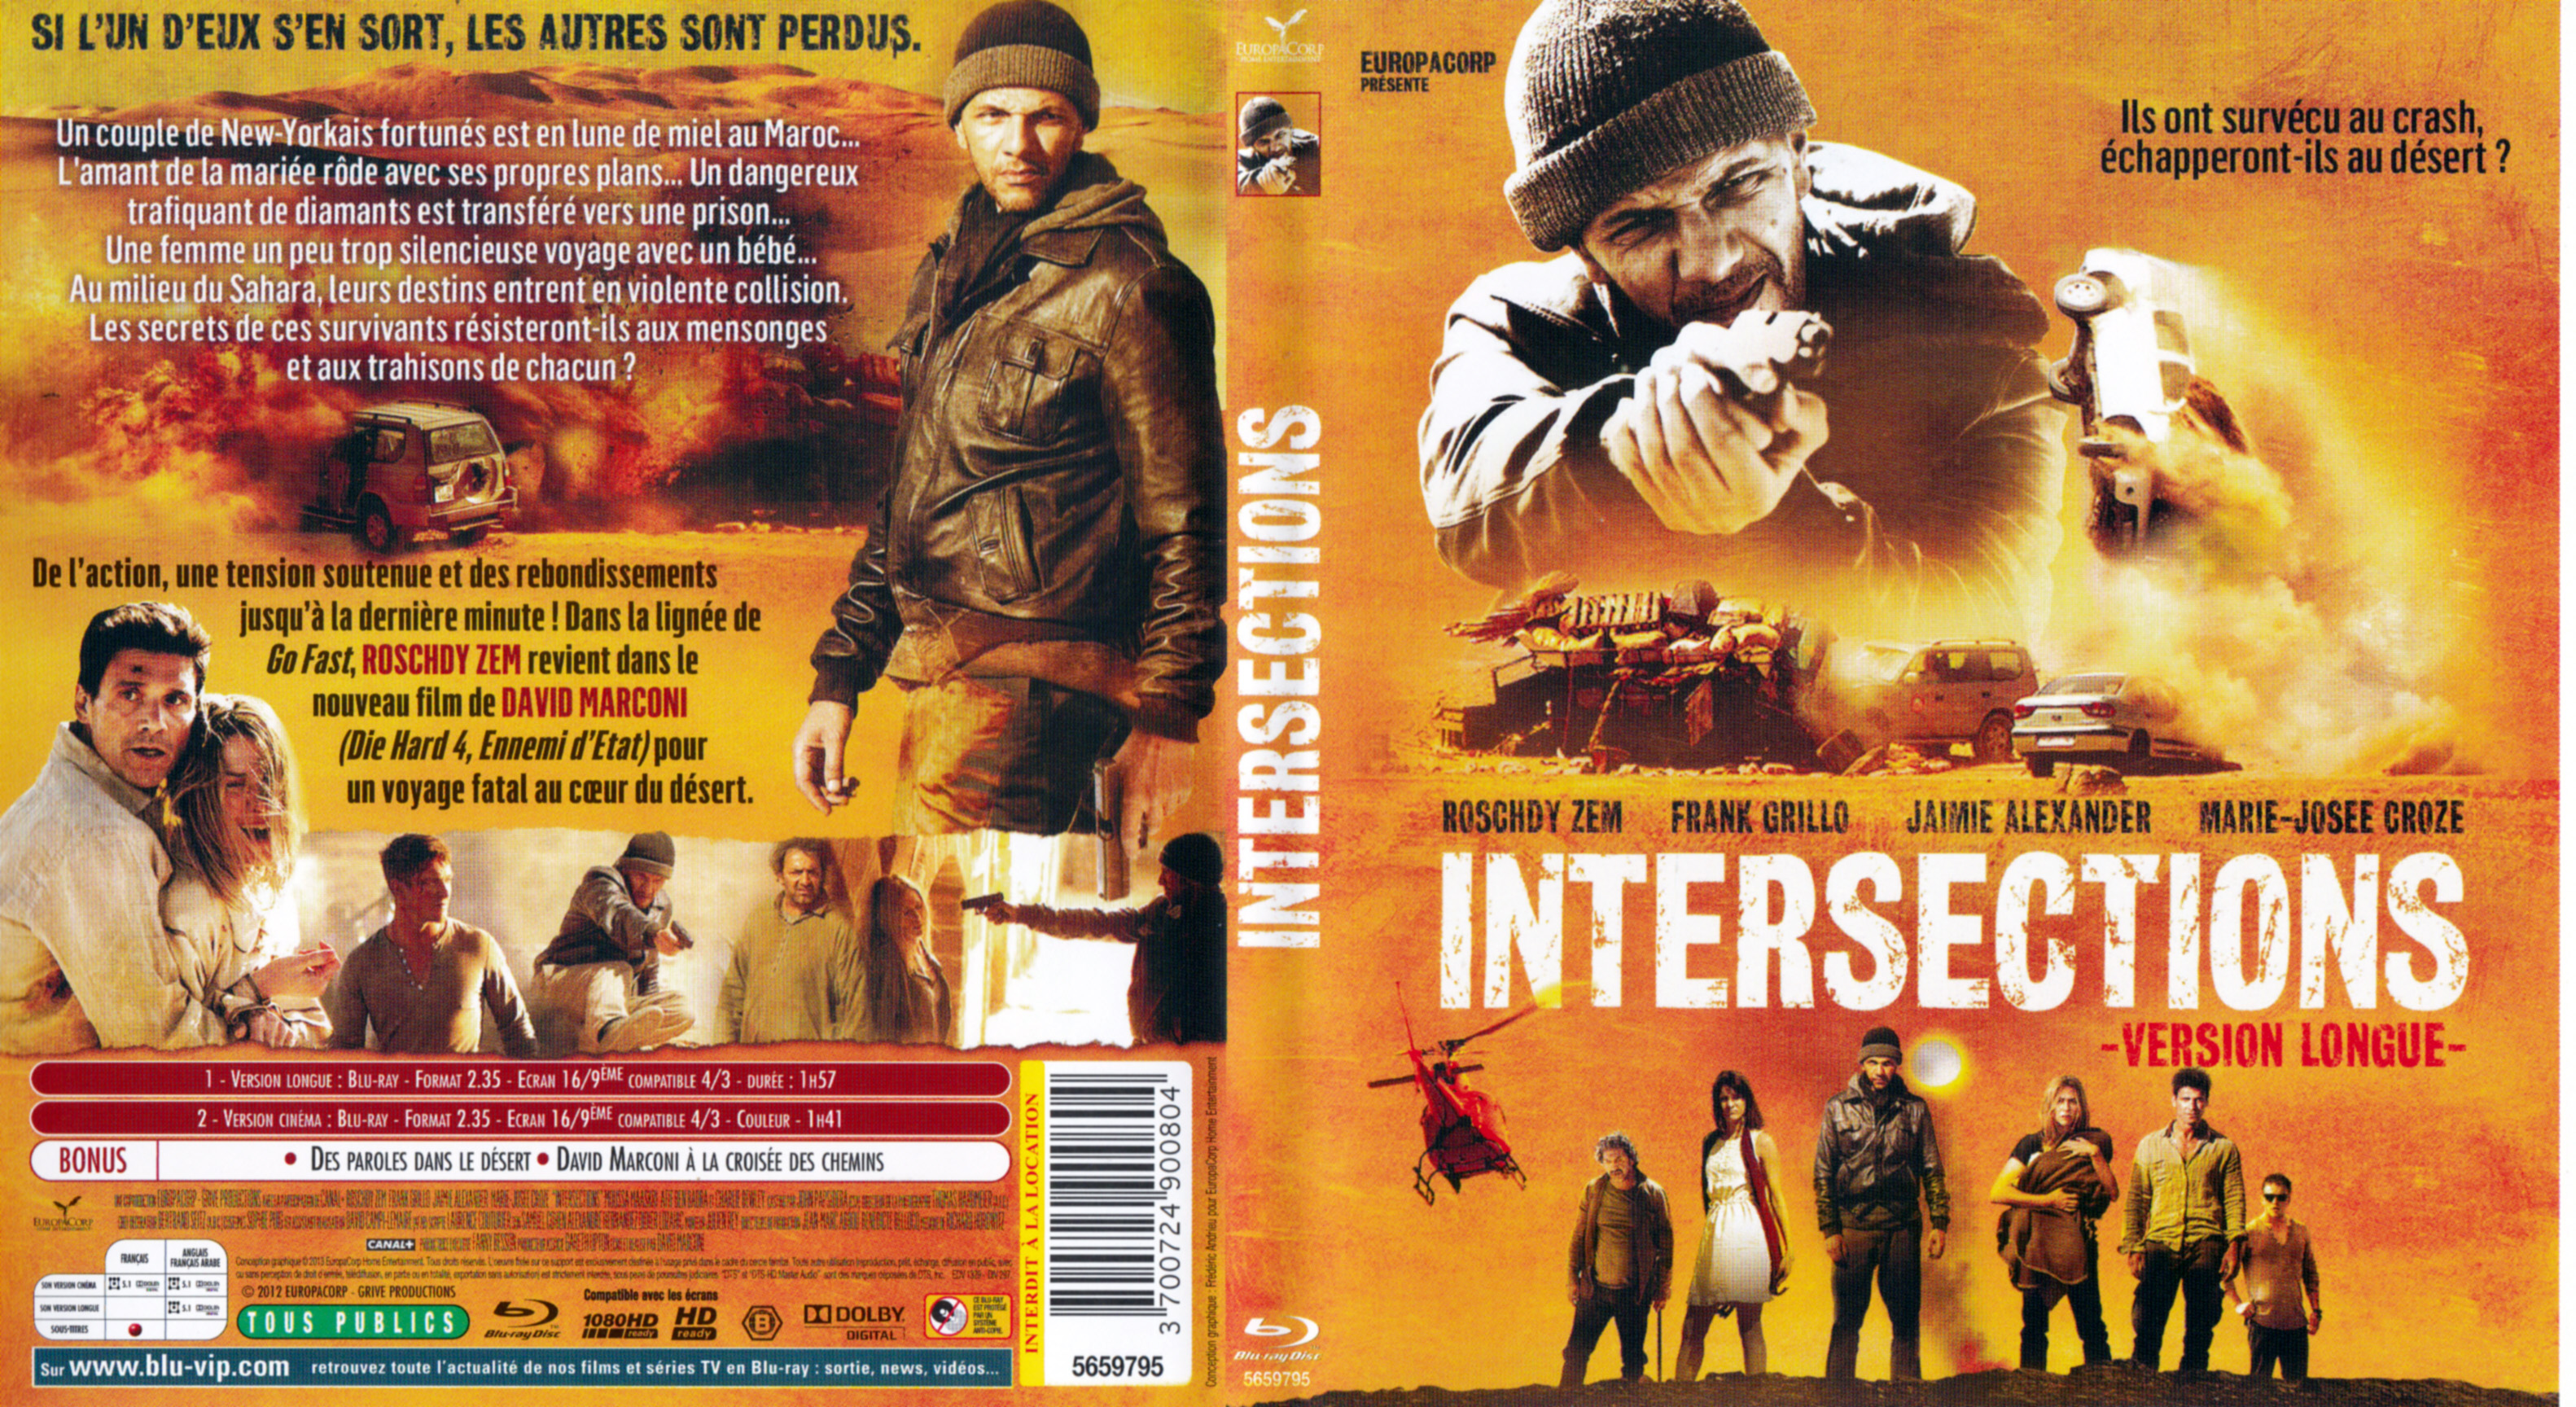 Jaquette DVD Intersections (BLU-RAY)